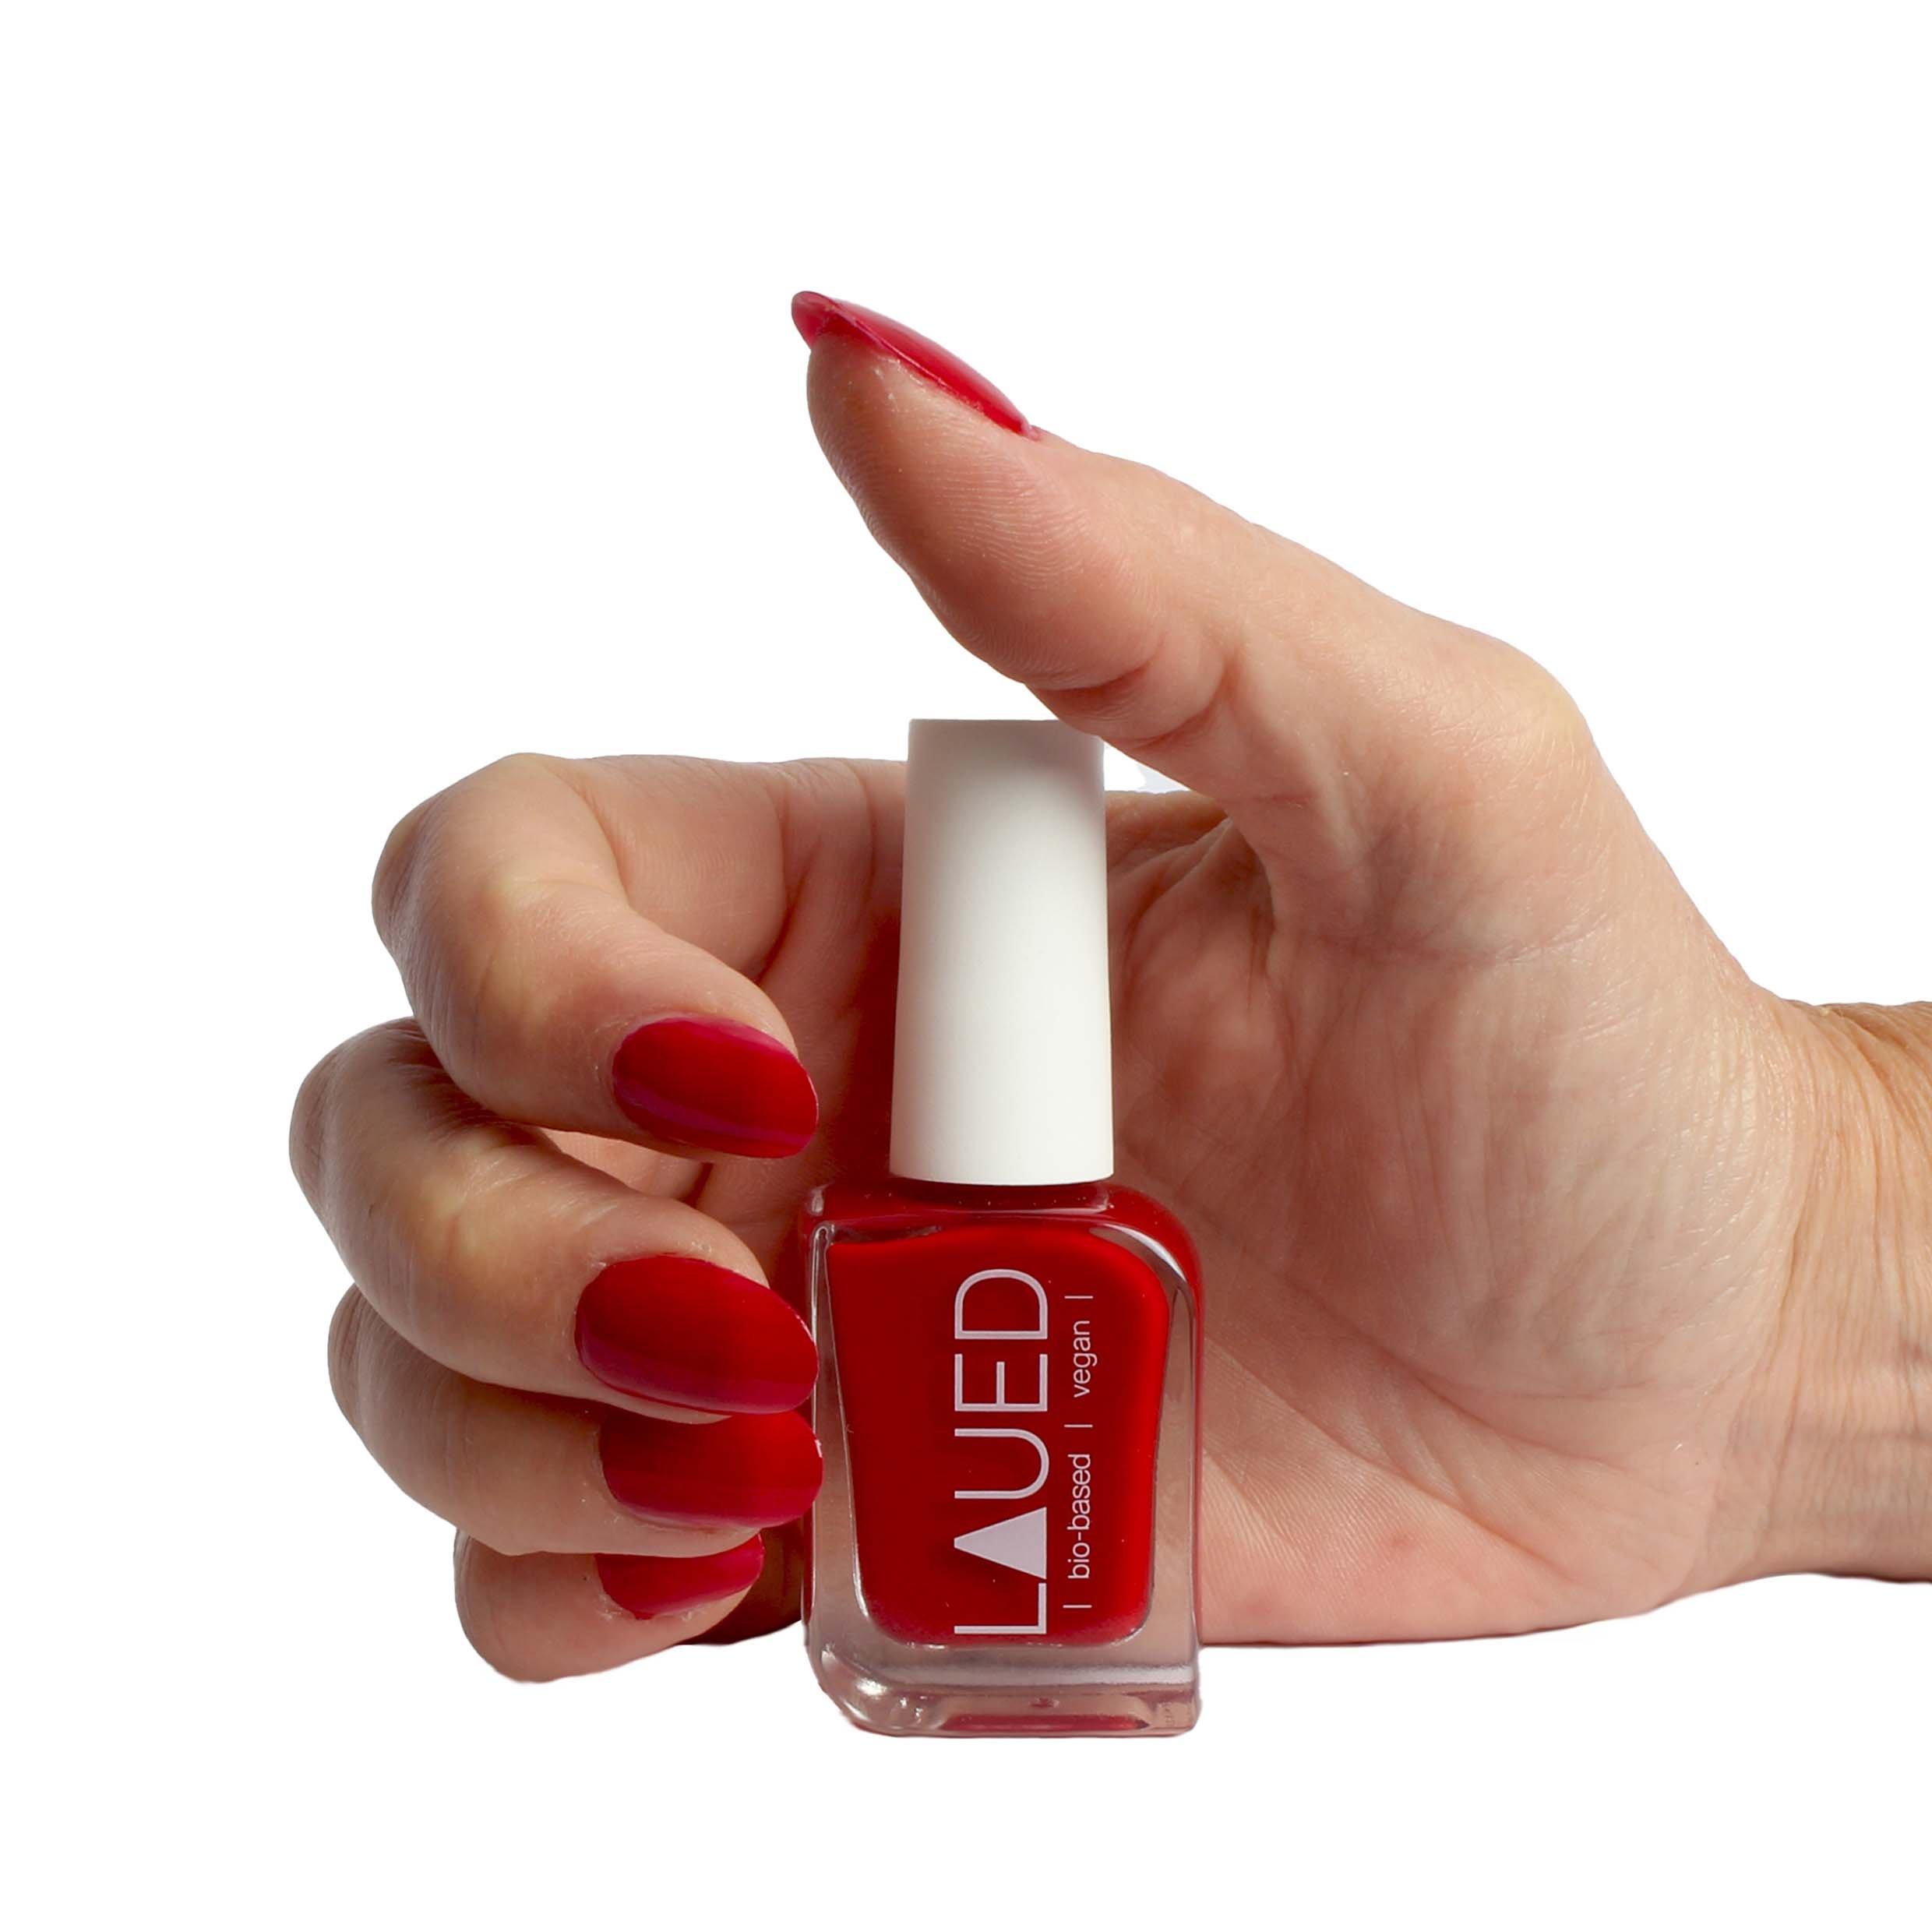 LAUED  vernis à ongles bio-based Fire 